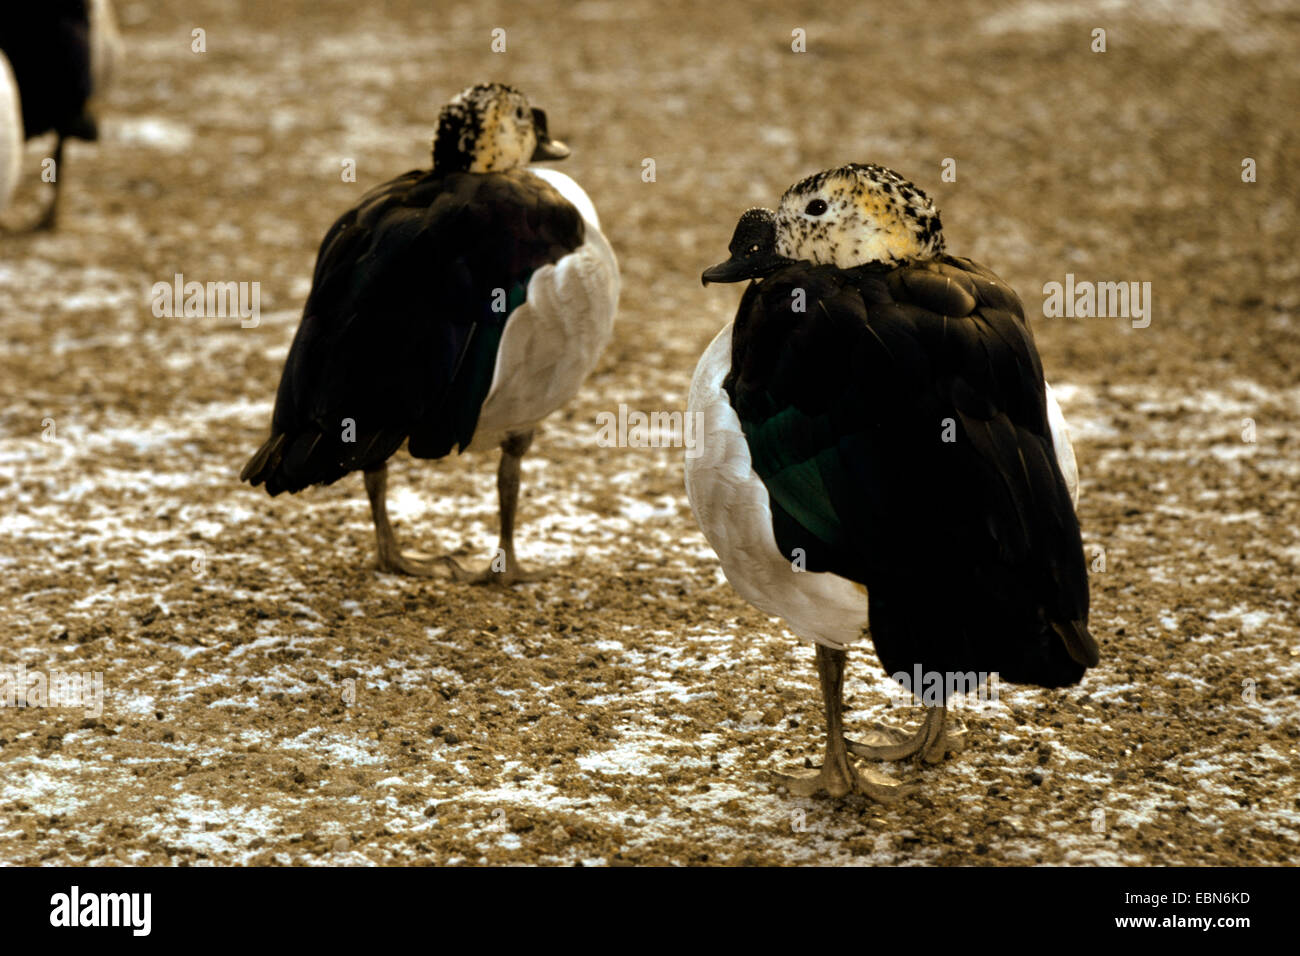 Comb duck, Knob-billed duck (Sarkidiornis melanotos, Sarkidiornis melanotus), two comb ducks standing on sand Stock Photo